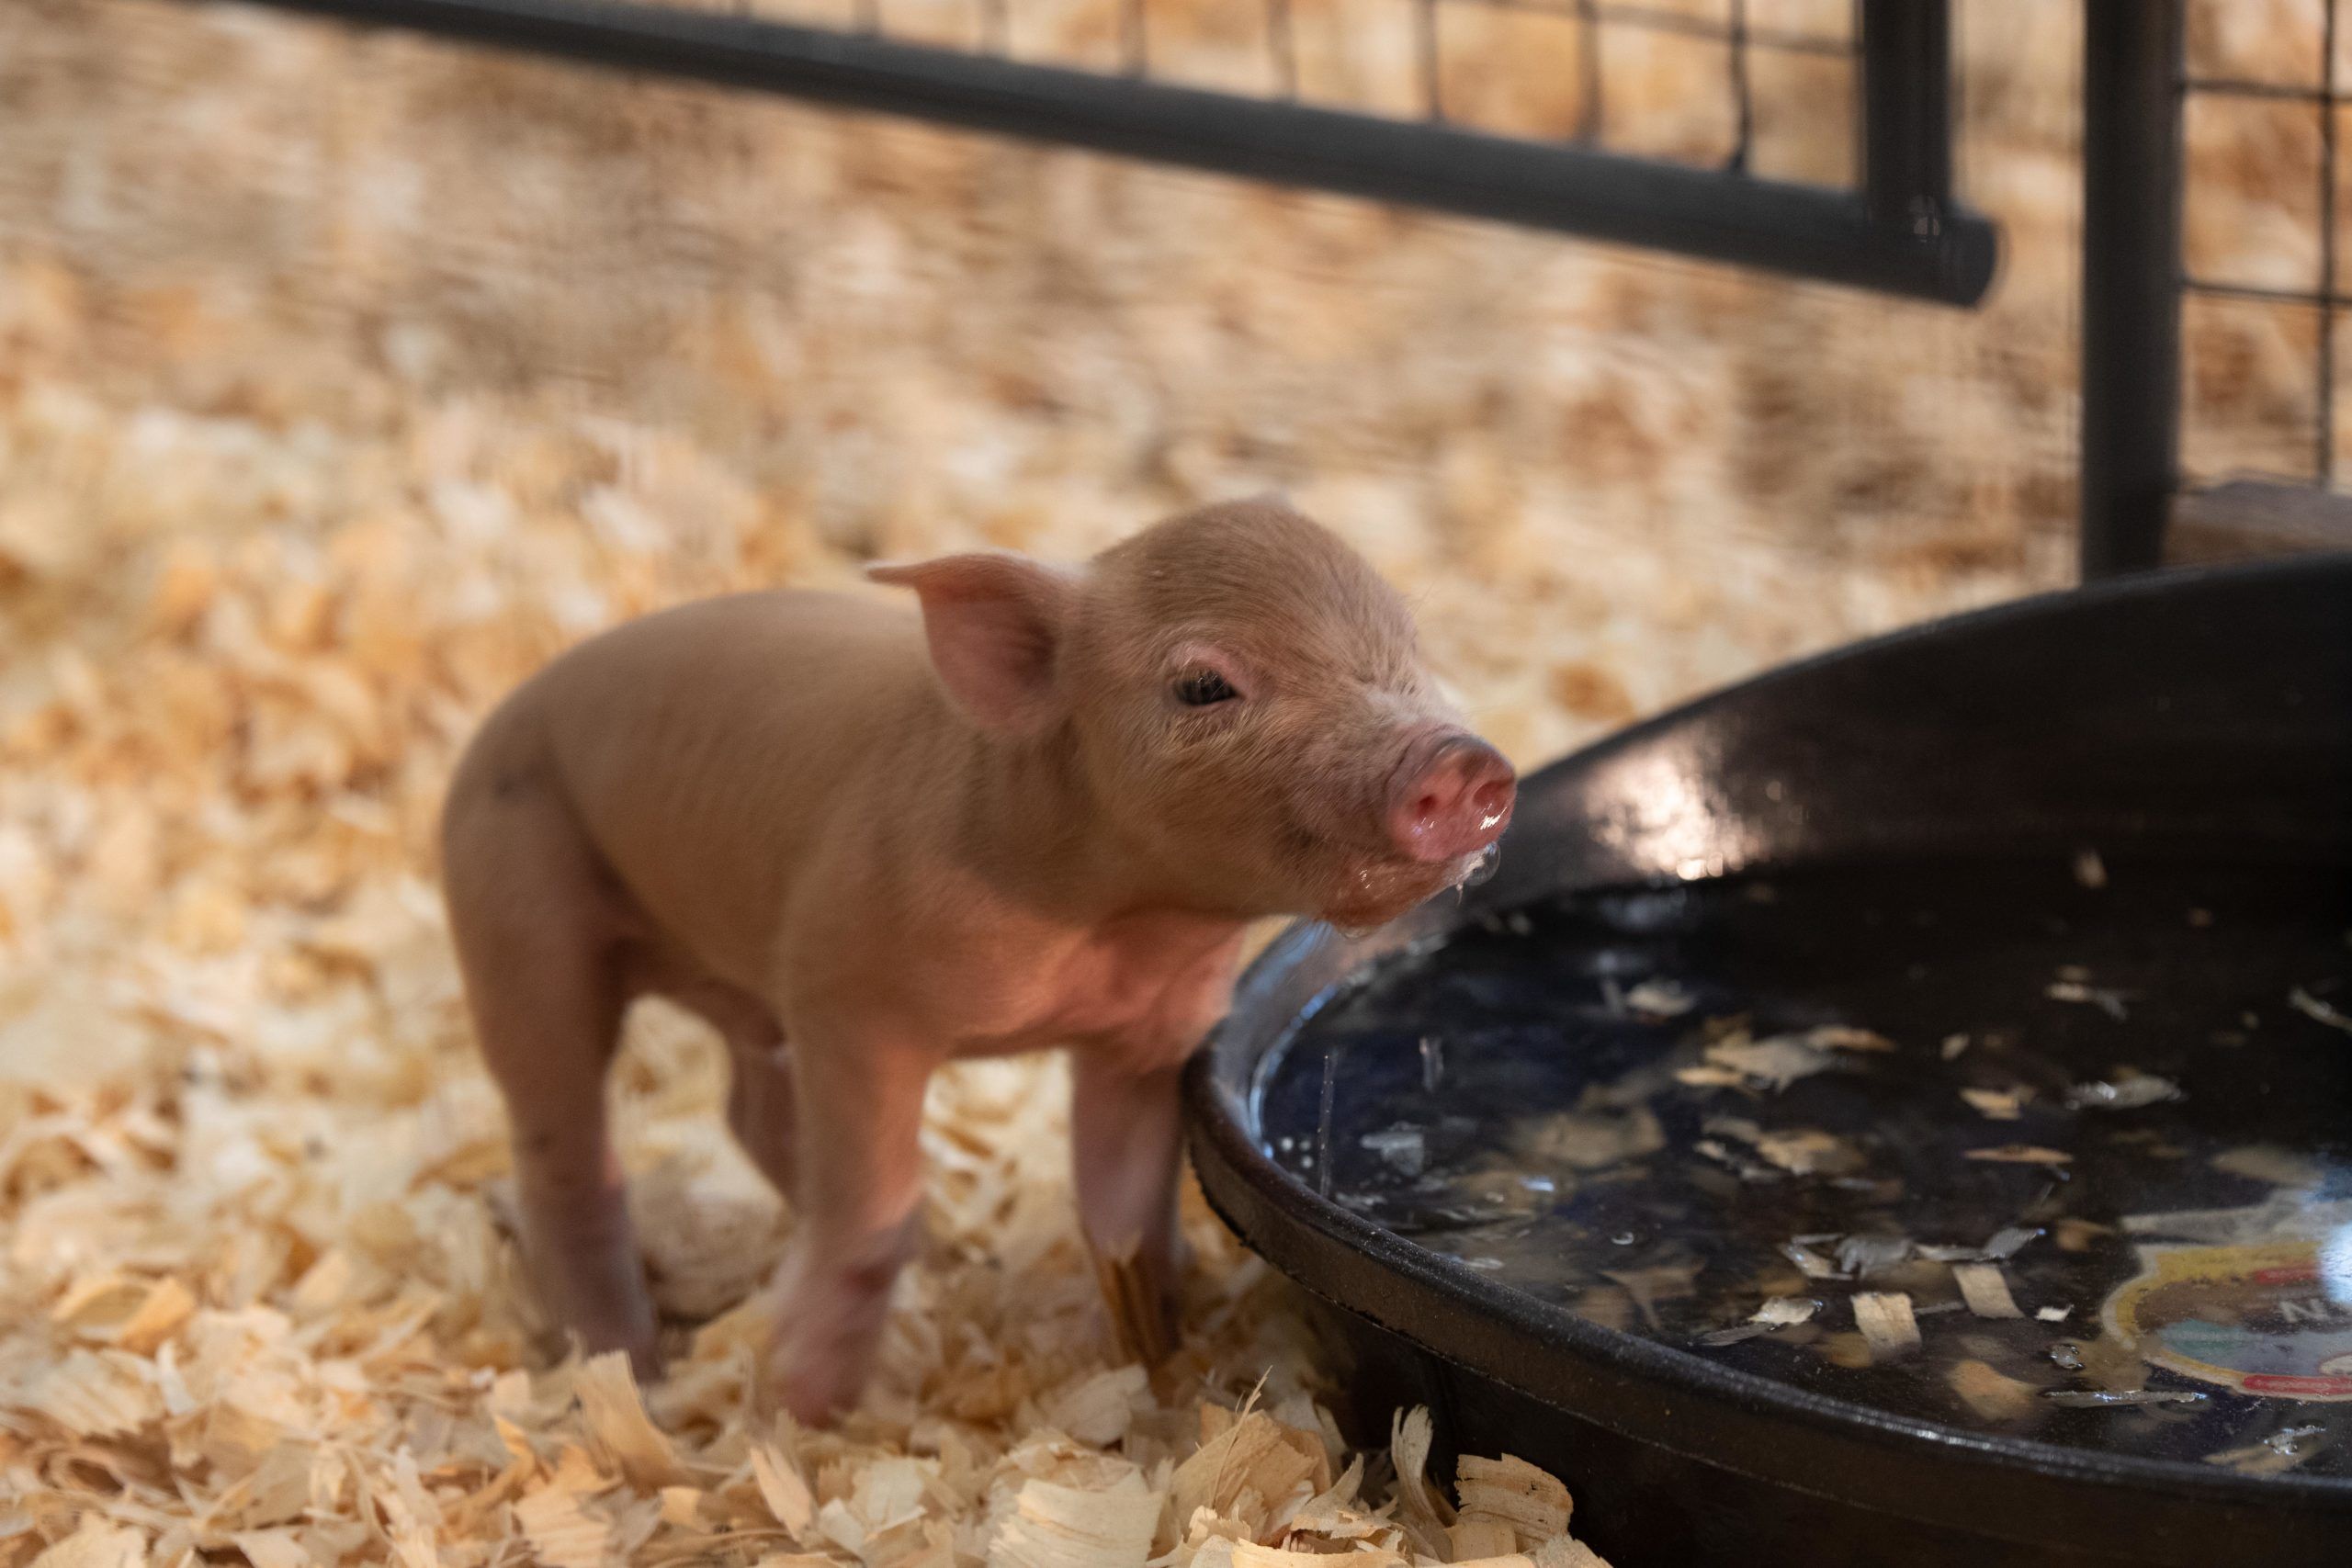 Baby pig drinking water out of a bowl during animals and agriculture at the Colorado State Fair